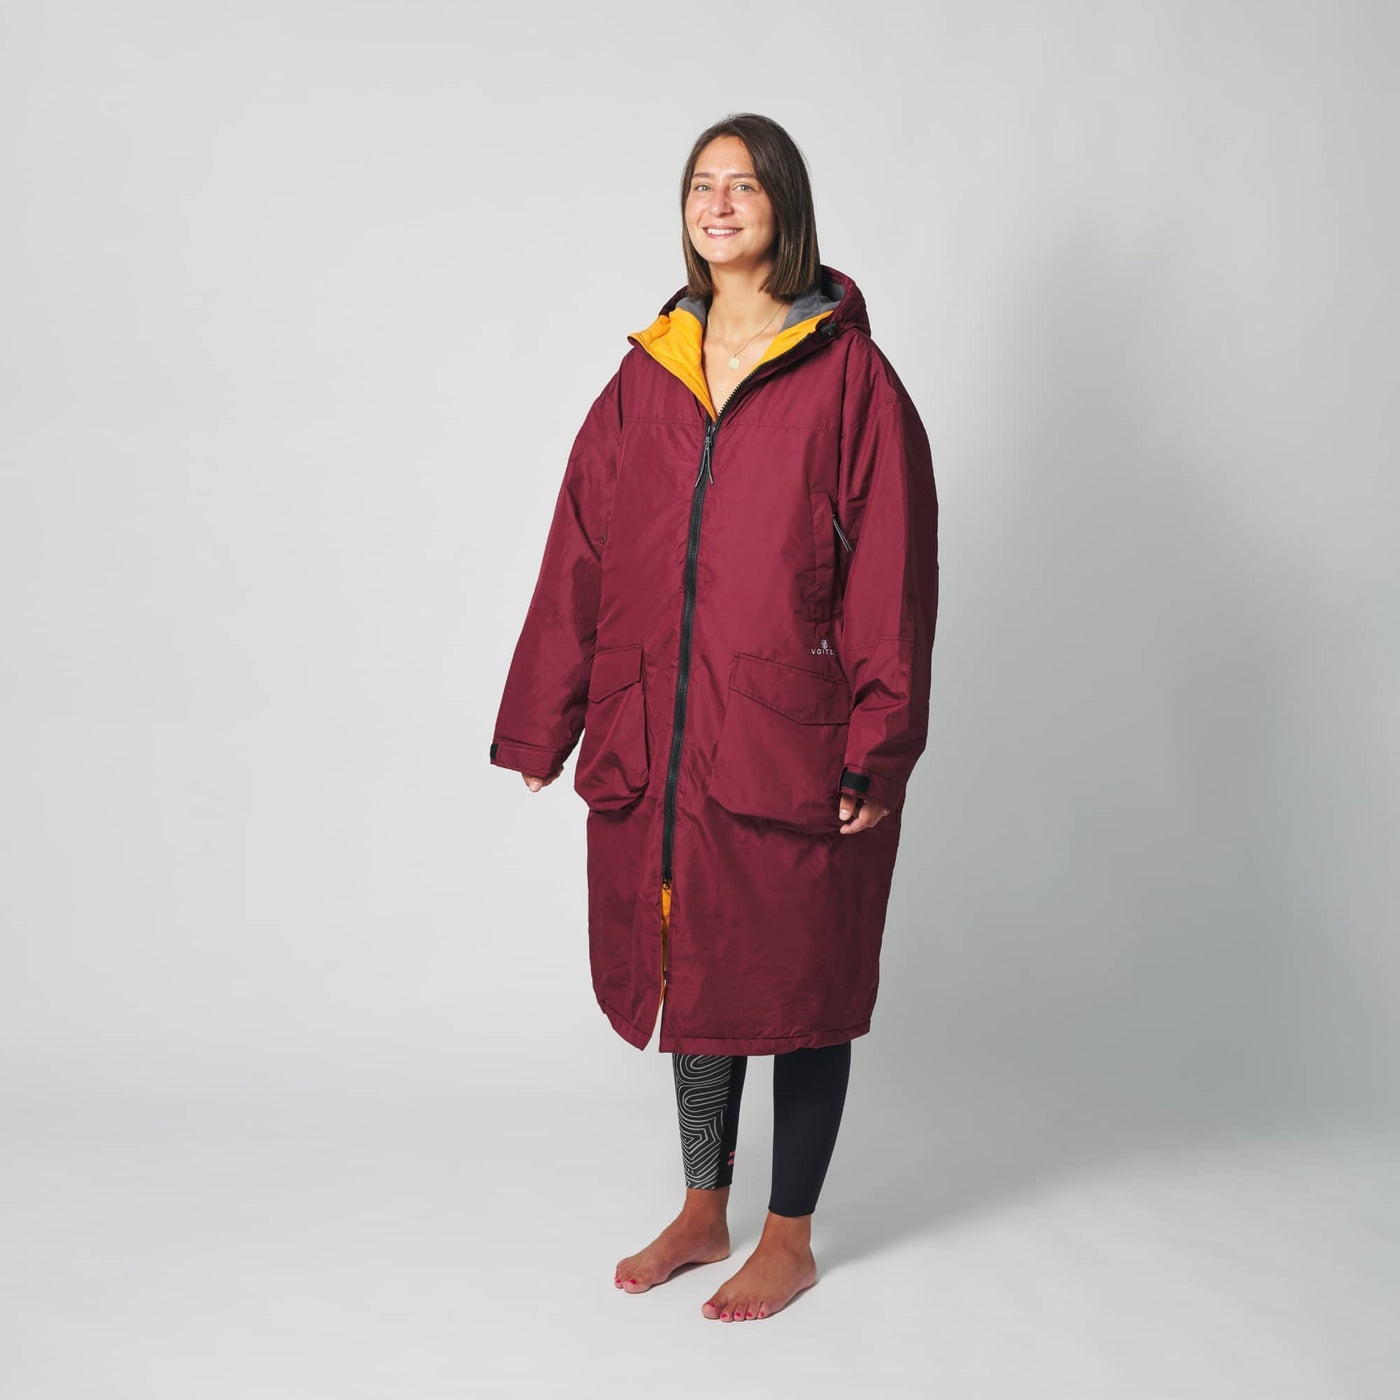 VOITED 2nd Edition Outdoor Changing Robe & Drycoat for Surfing, Camping, Vanlife & Wild Swimming - Cardinal